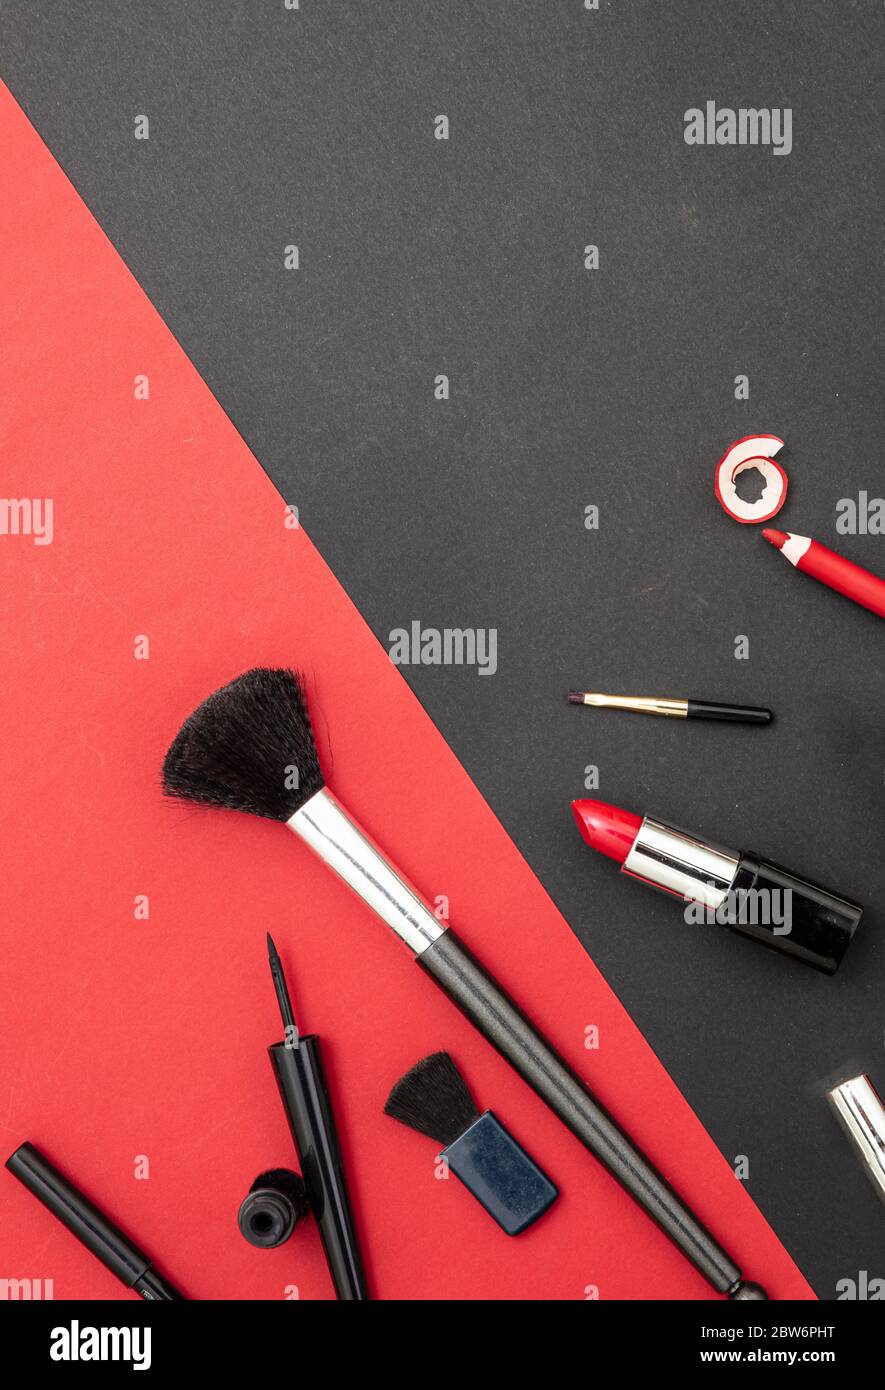 Make up cosmetics accessories in red and black. Lipstick, nail polish, eye pencil and brushes against red and black color background Stock Photo